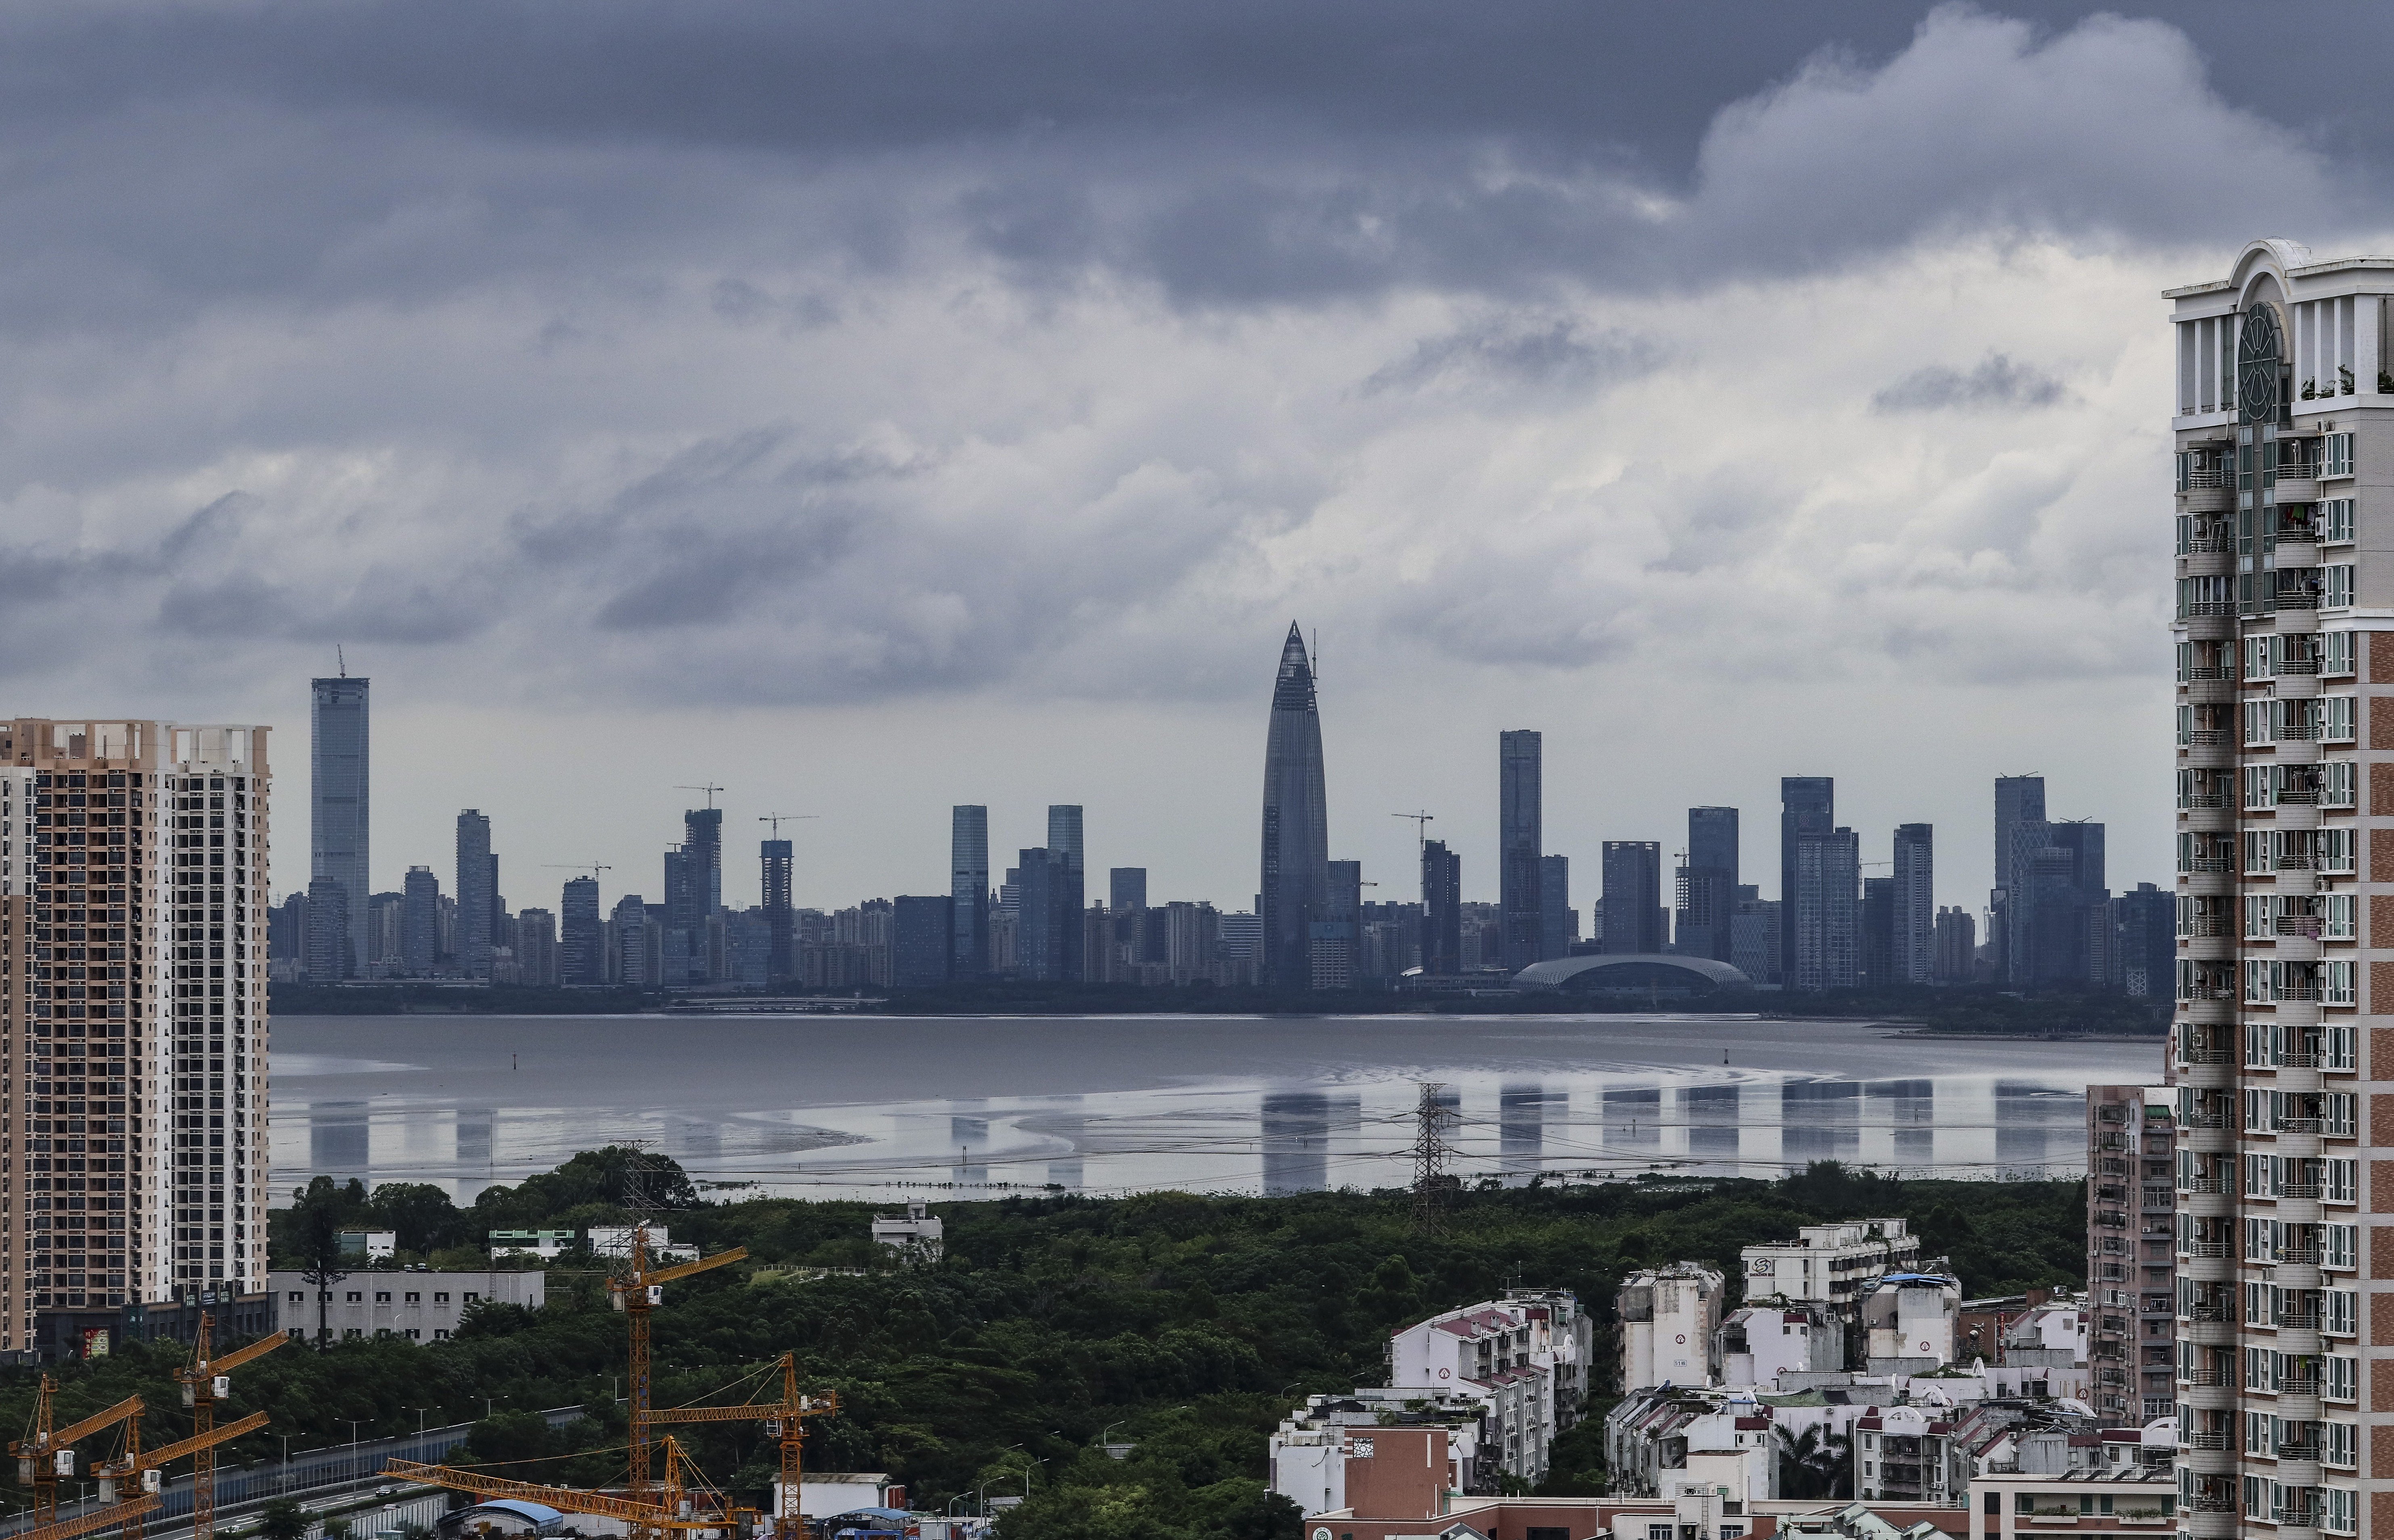 Shenzhen is one of the major Guangdong cities at the heart of the Greater Bay Area plan. Photo: Roy Issa